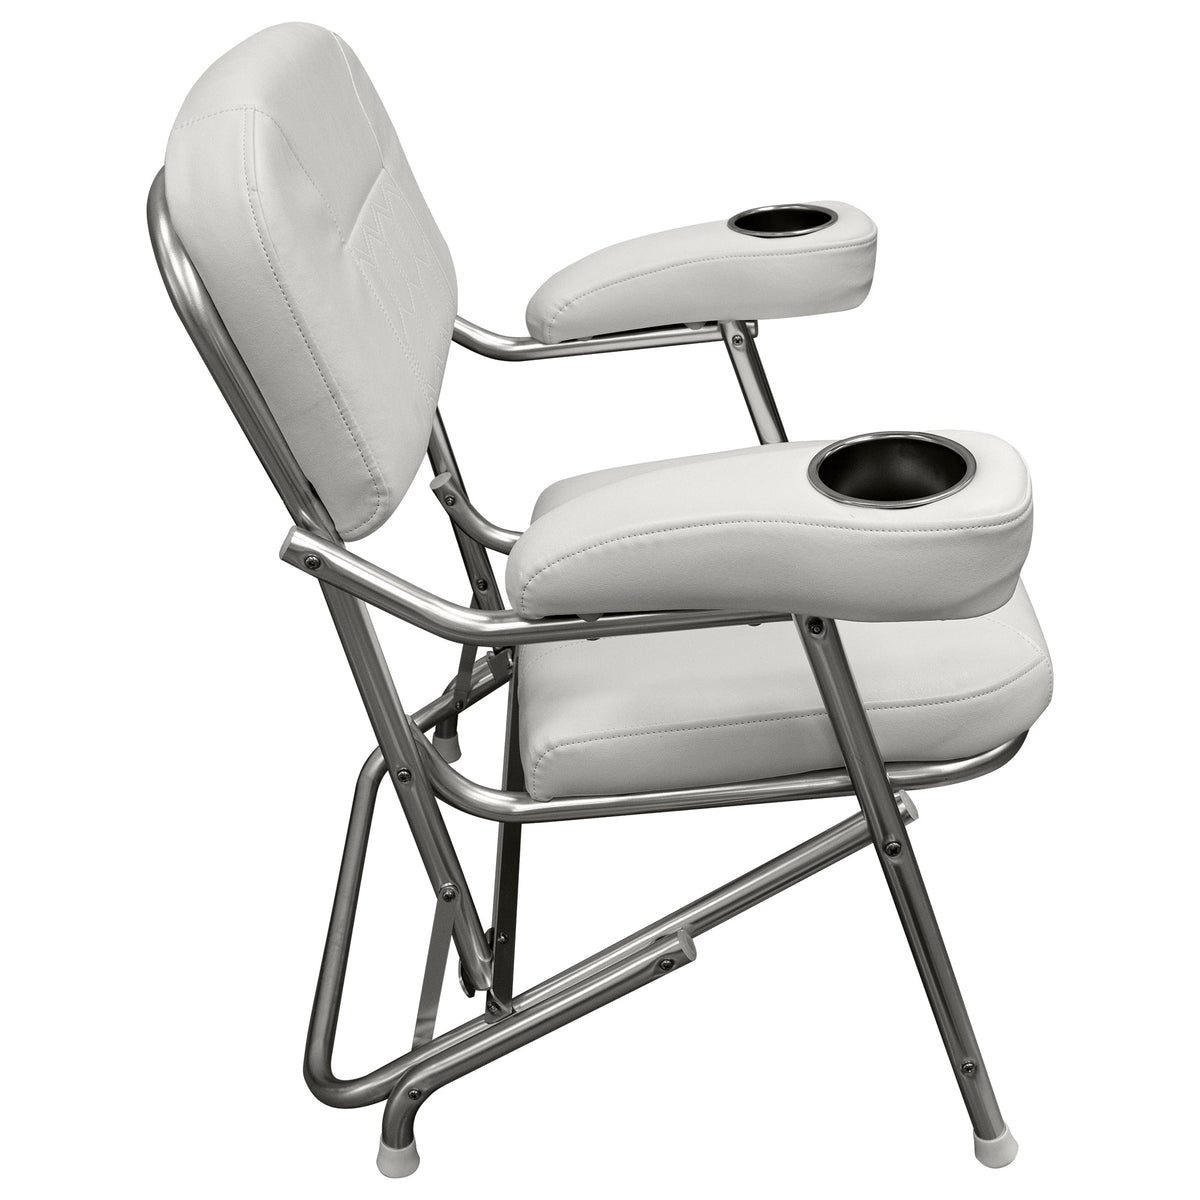 Wise 3367 Deluxe Offshore Folding Deck Chair